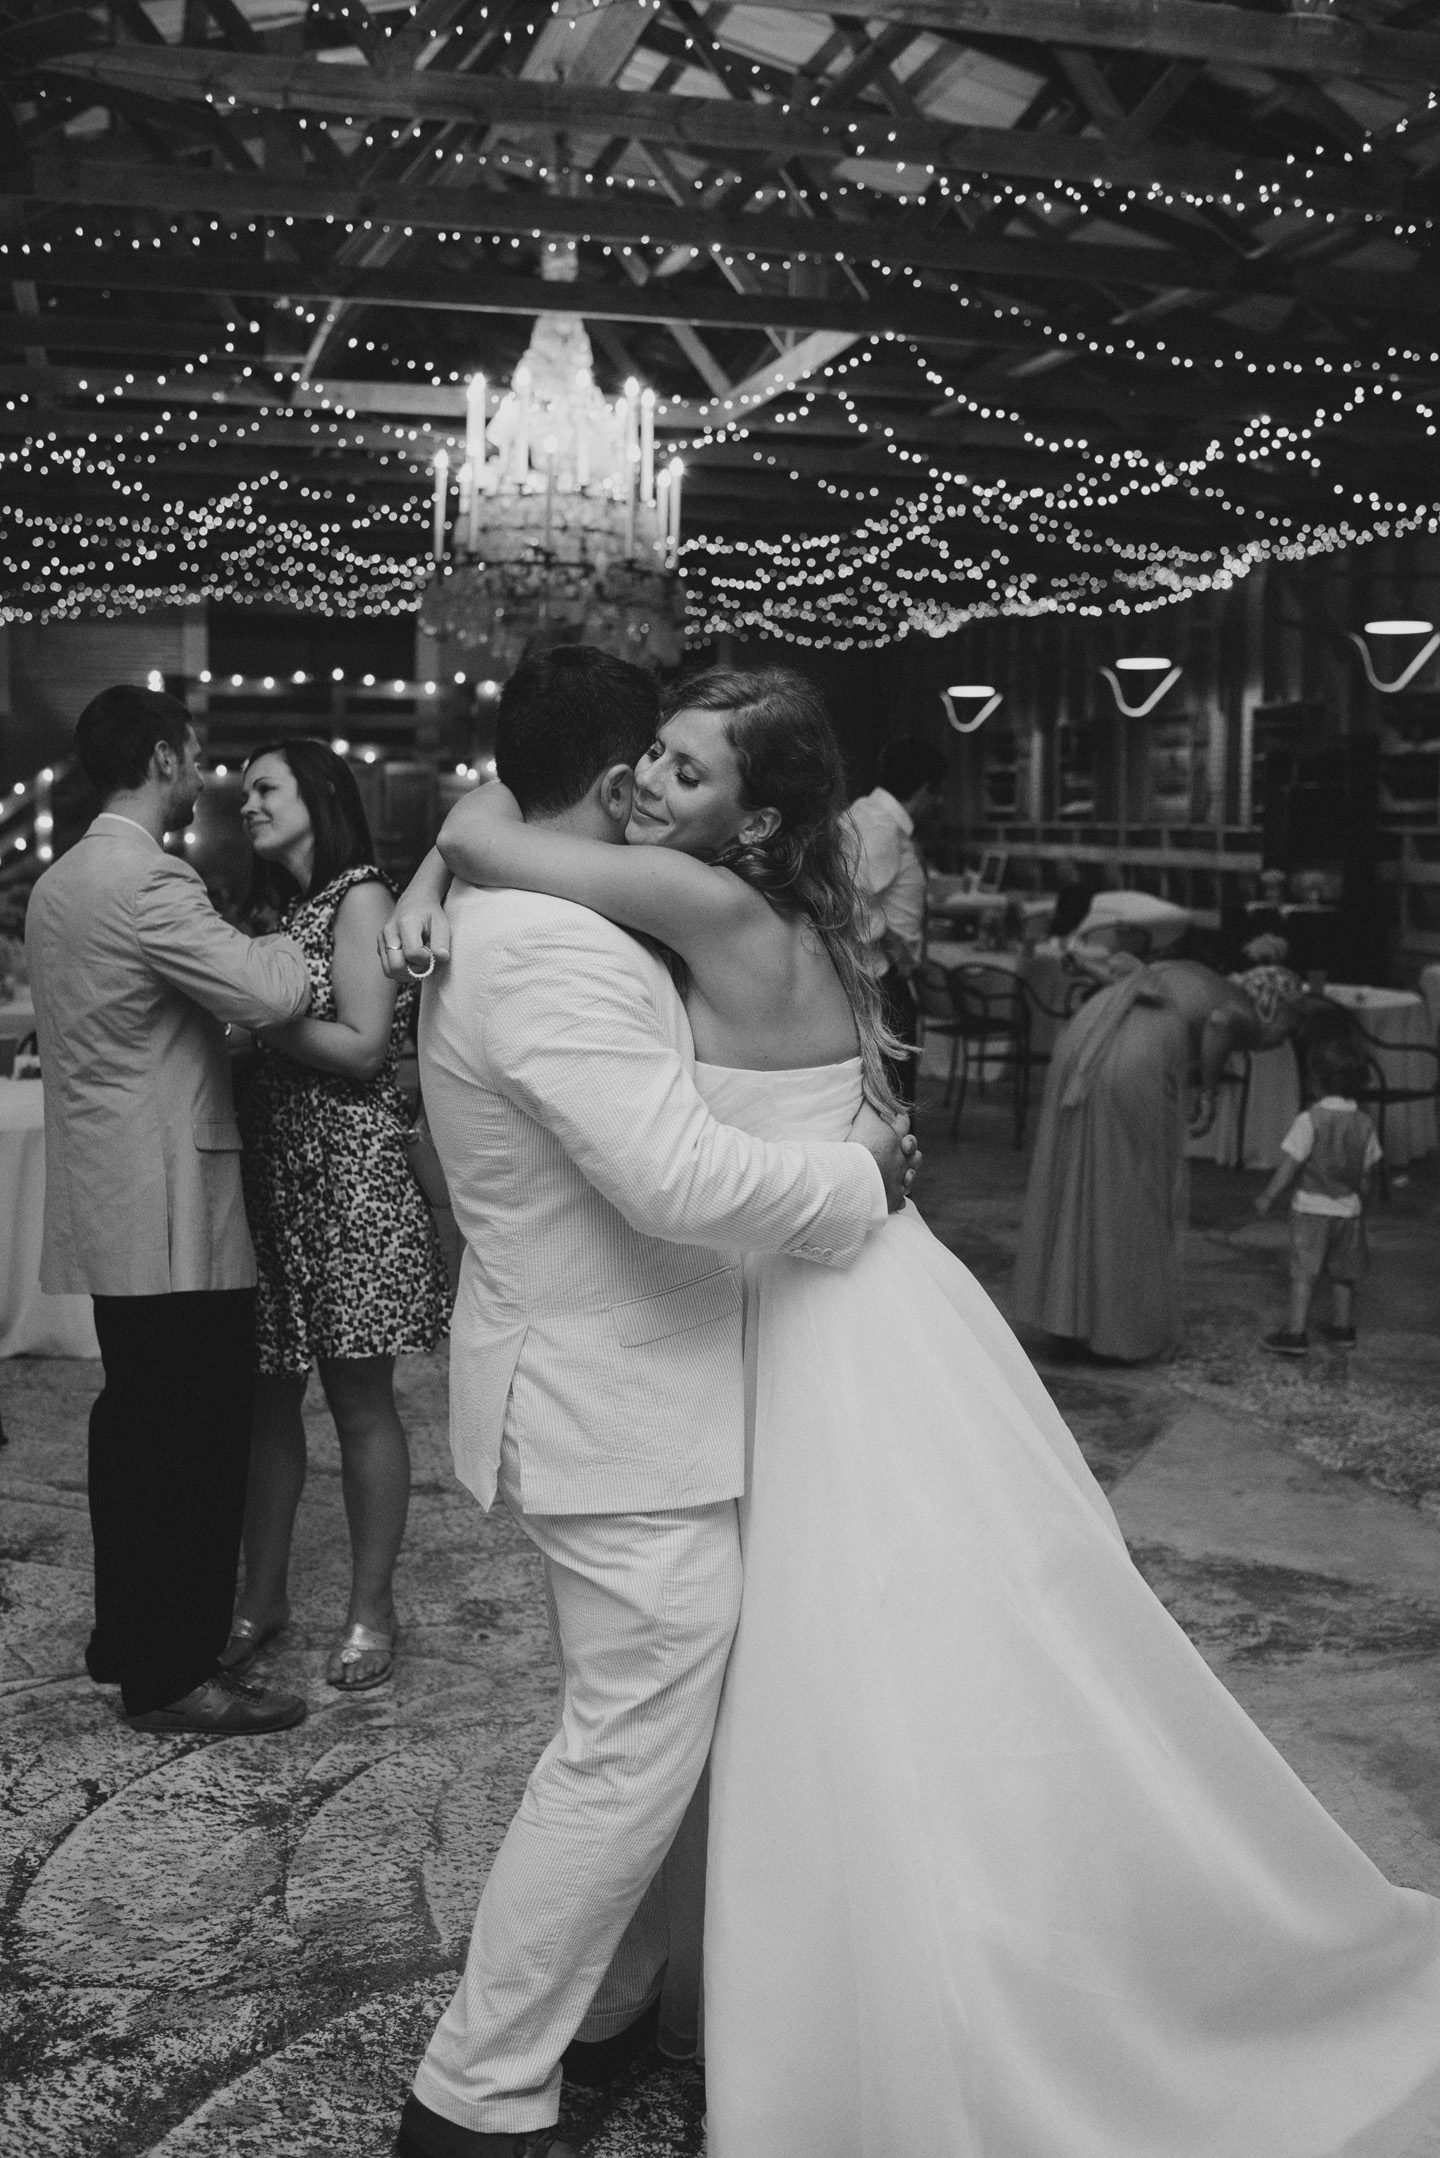 Kelly and Nathan by Neil GT Photography Sinkland Farms Christiansburg VA Wedding Bride and Groom Dancing BW